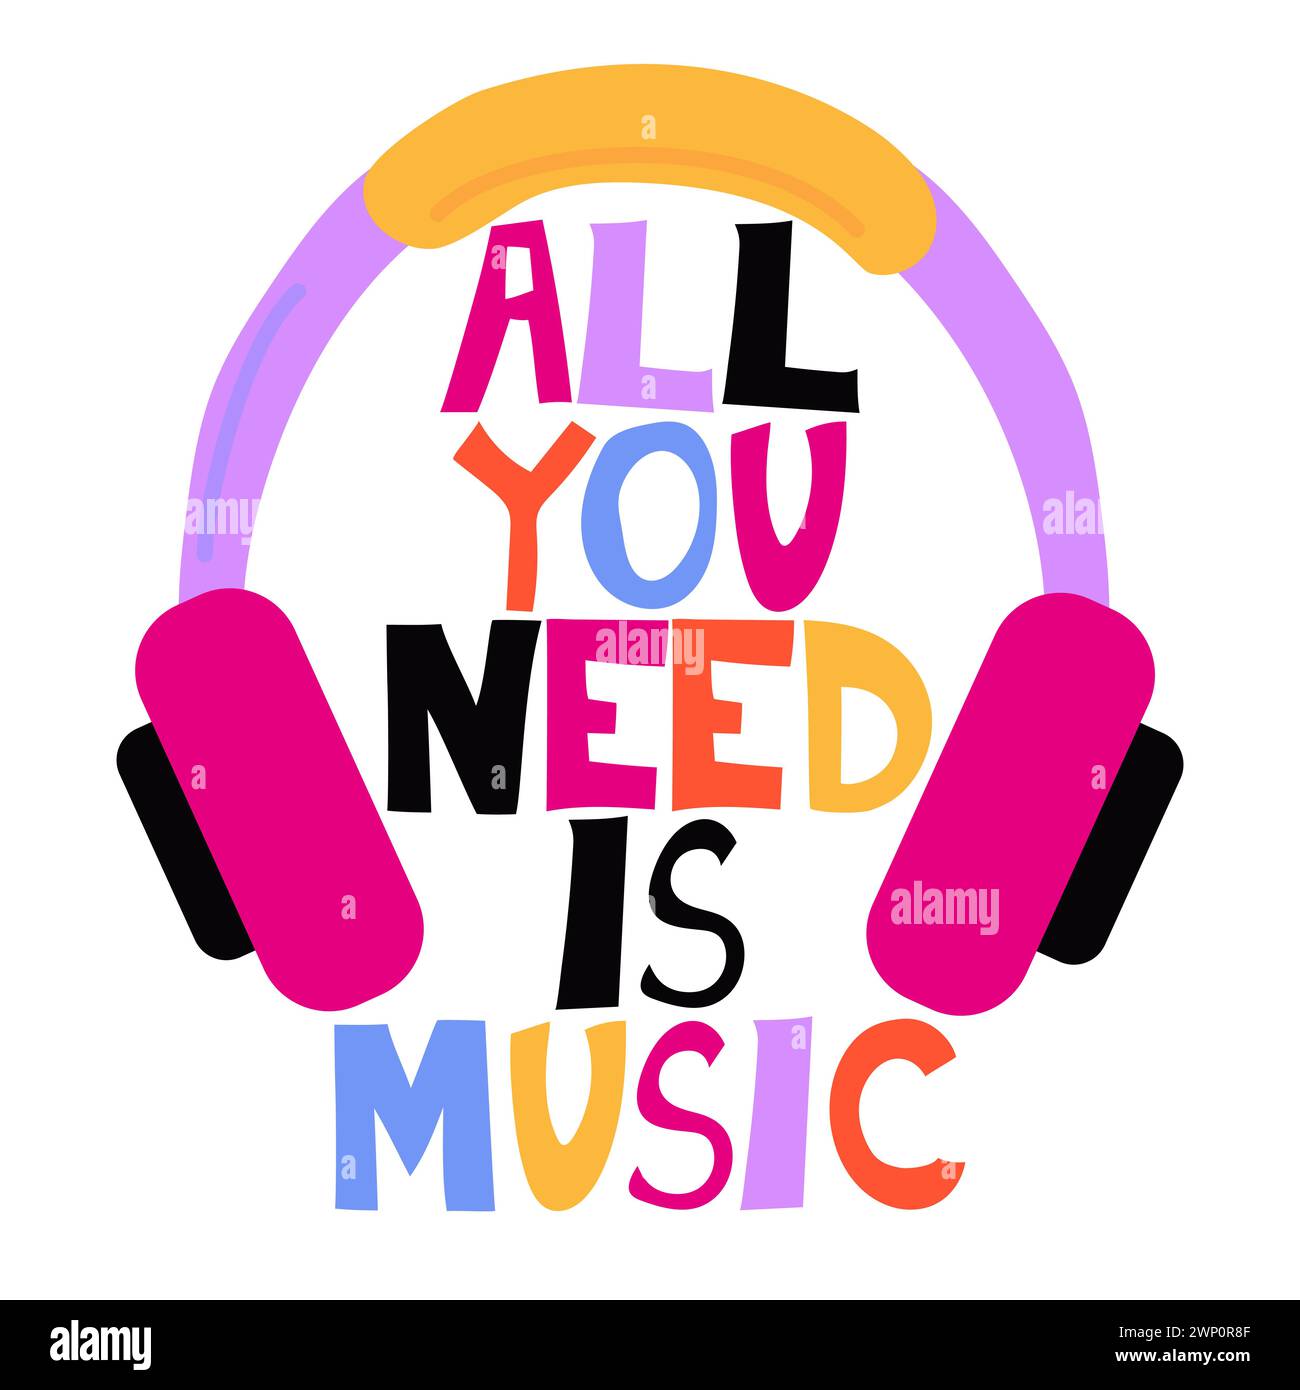 All you need is music. Motivational music on white background. Vector illustration. Stock Vector